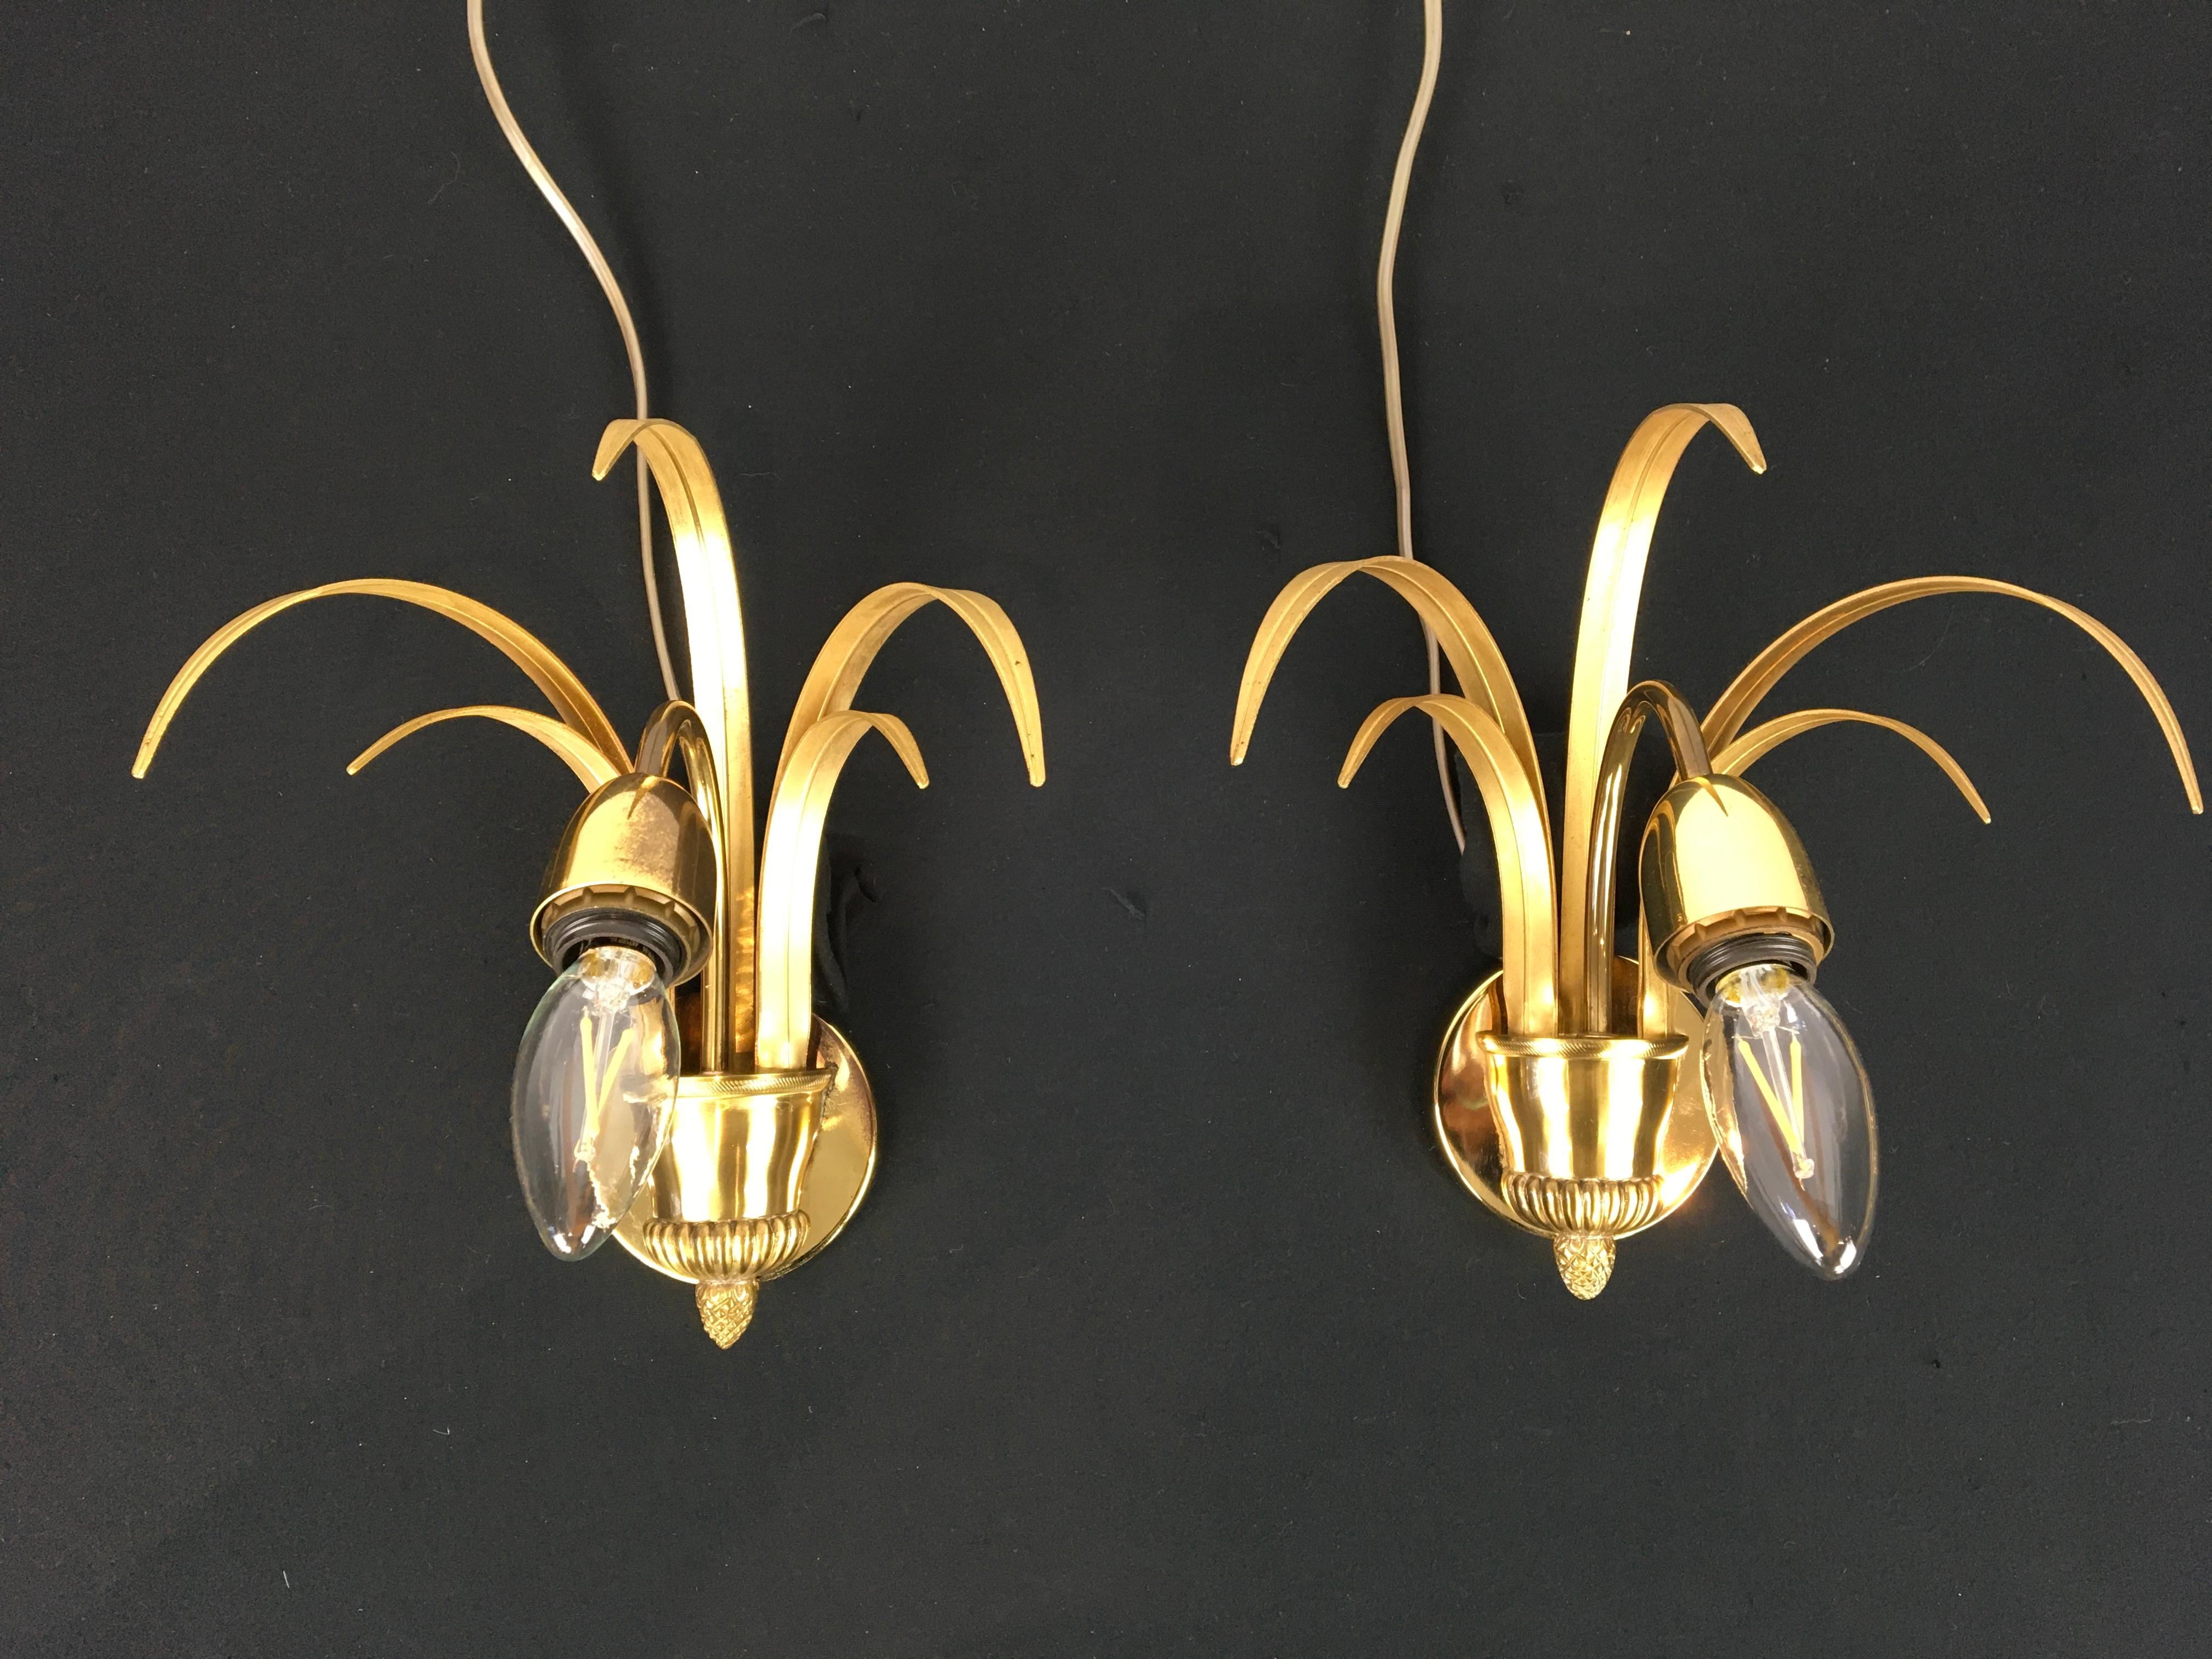 Pair of pineapple leaves wall scones by S.A. Boulanger Belgium. 
1970s Hollywood Regency wall scones or wall lights made of metal and brass with a gold coloured finish. Marked at the back with label. 

These stylish wall lights will look great in